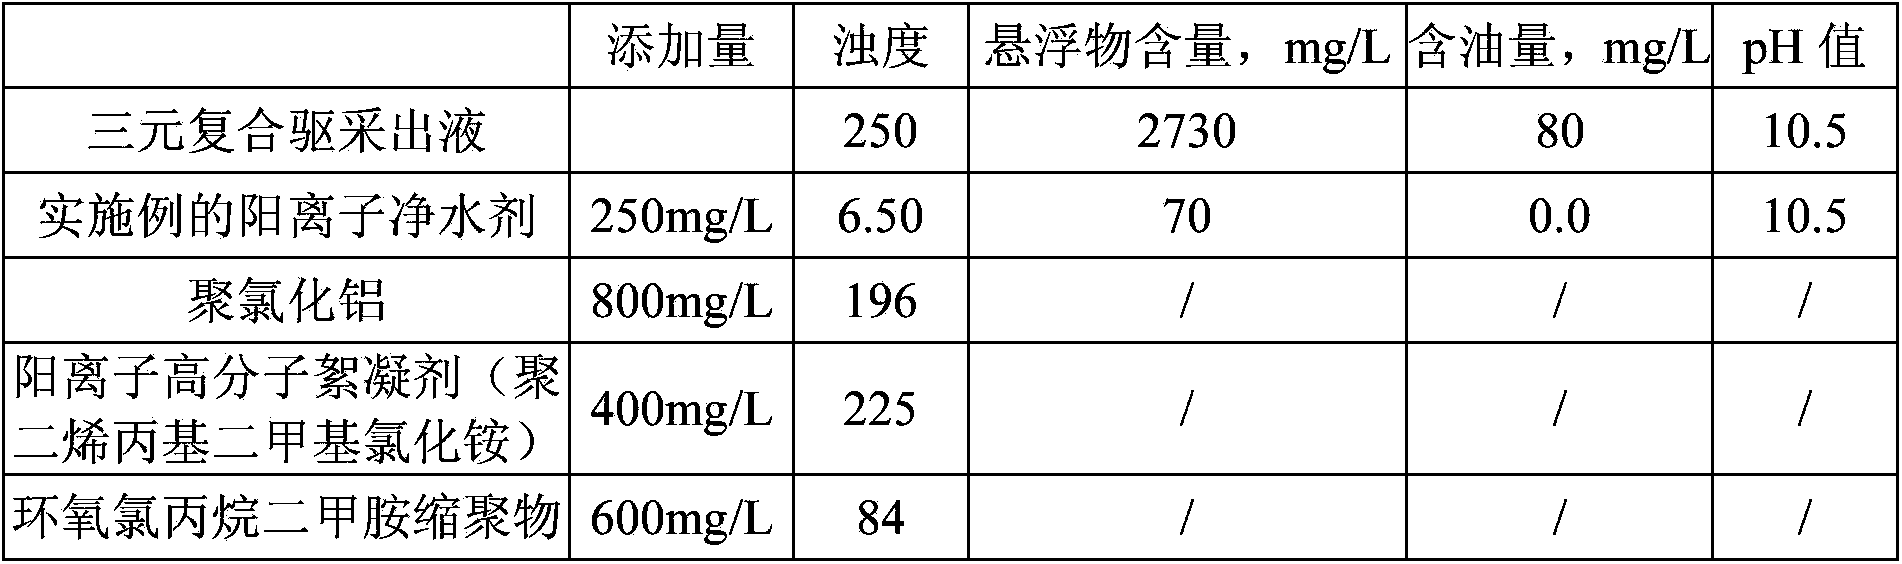 Cationic water purifying agent and application of same in oilfield chemical flooding produced liquid